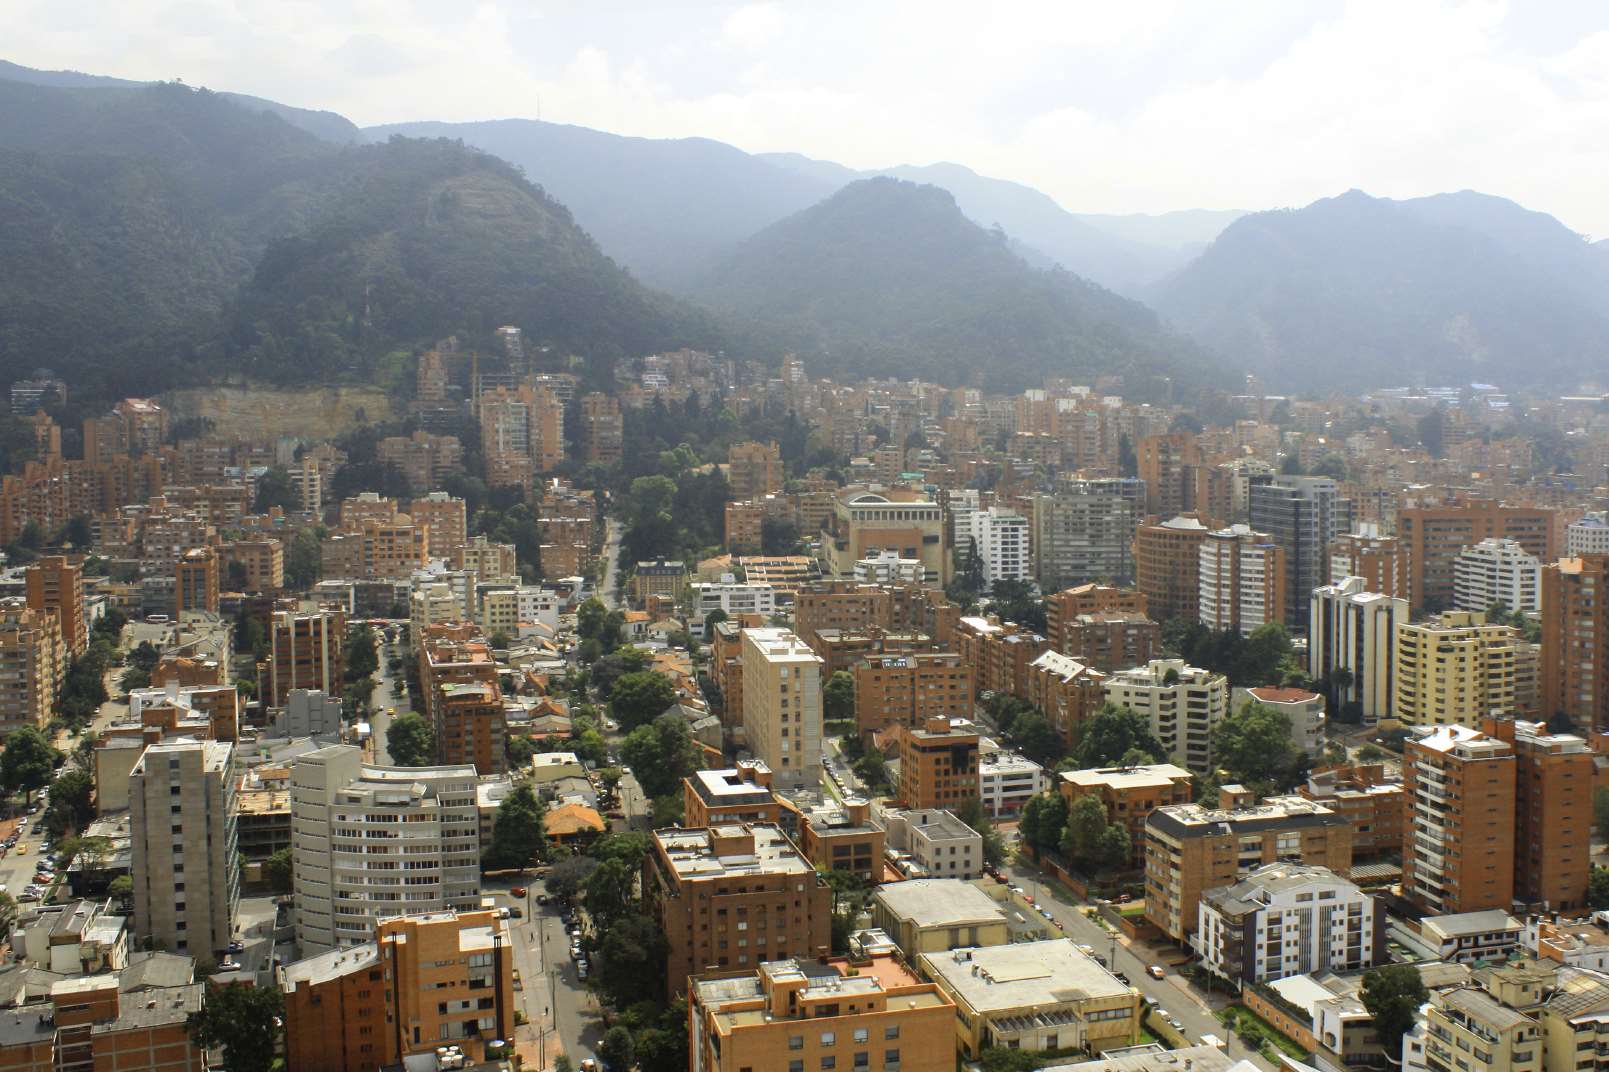 Sprawling Bogota is the capital of Colombia